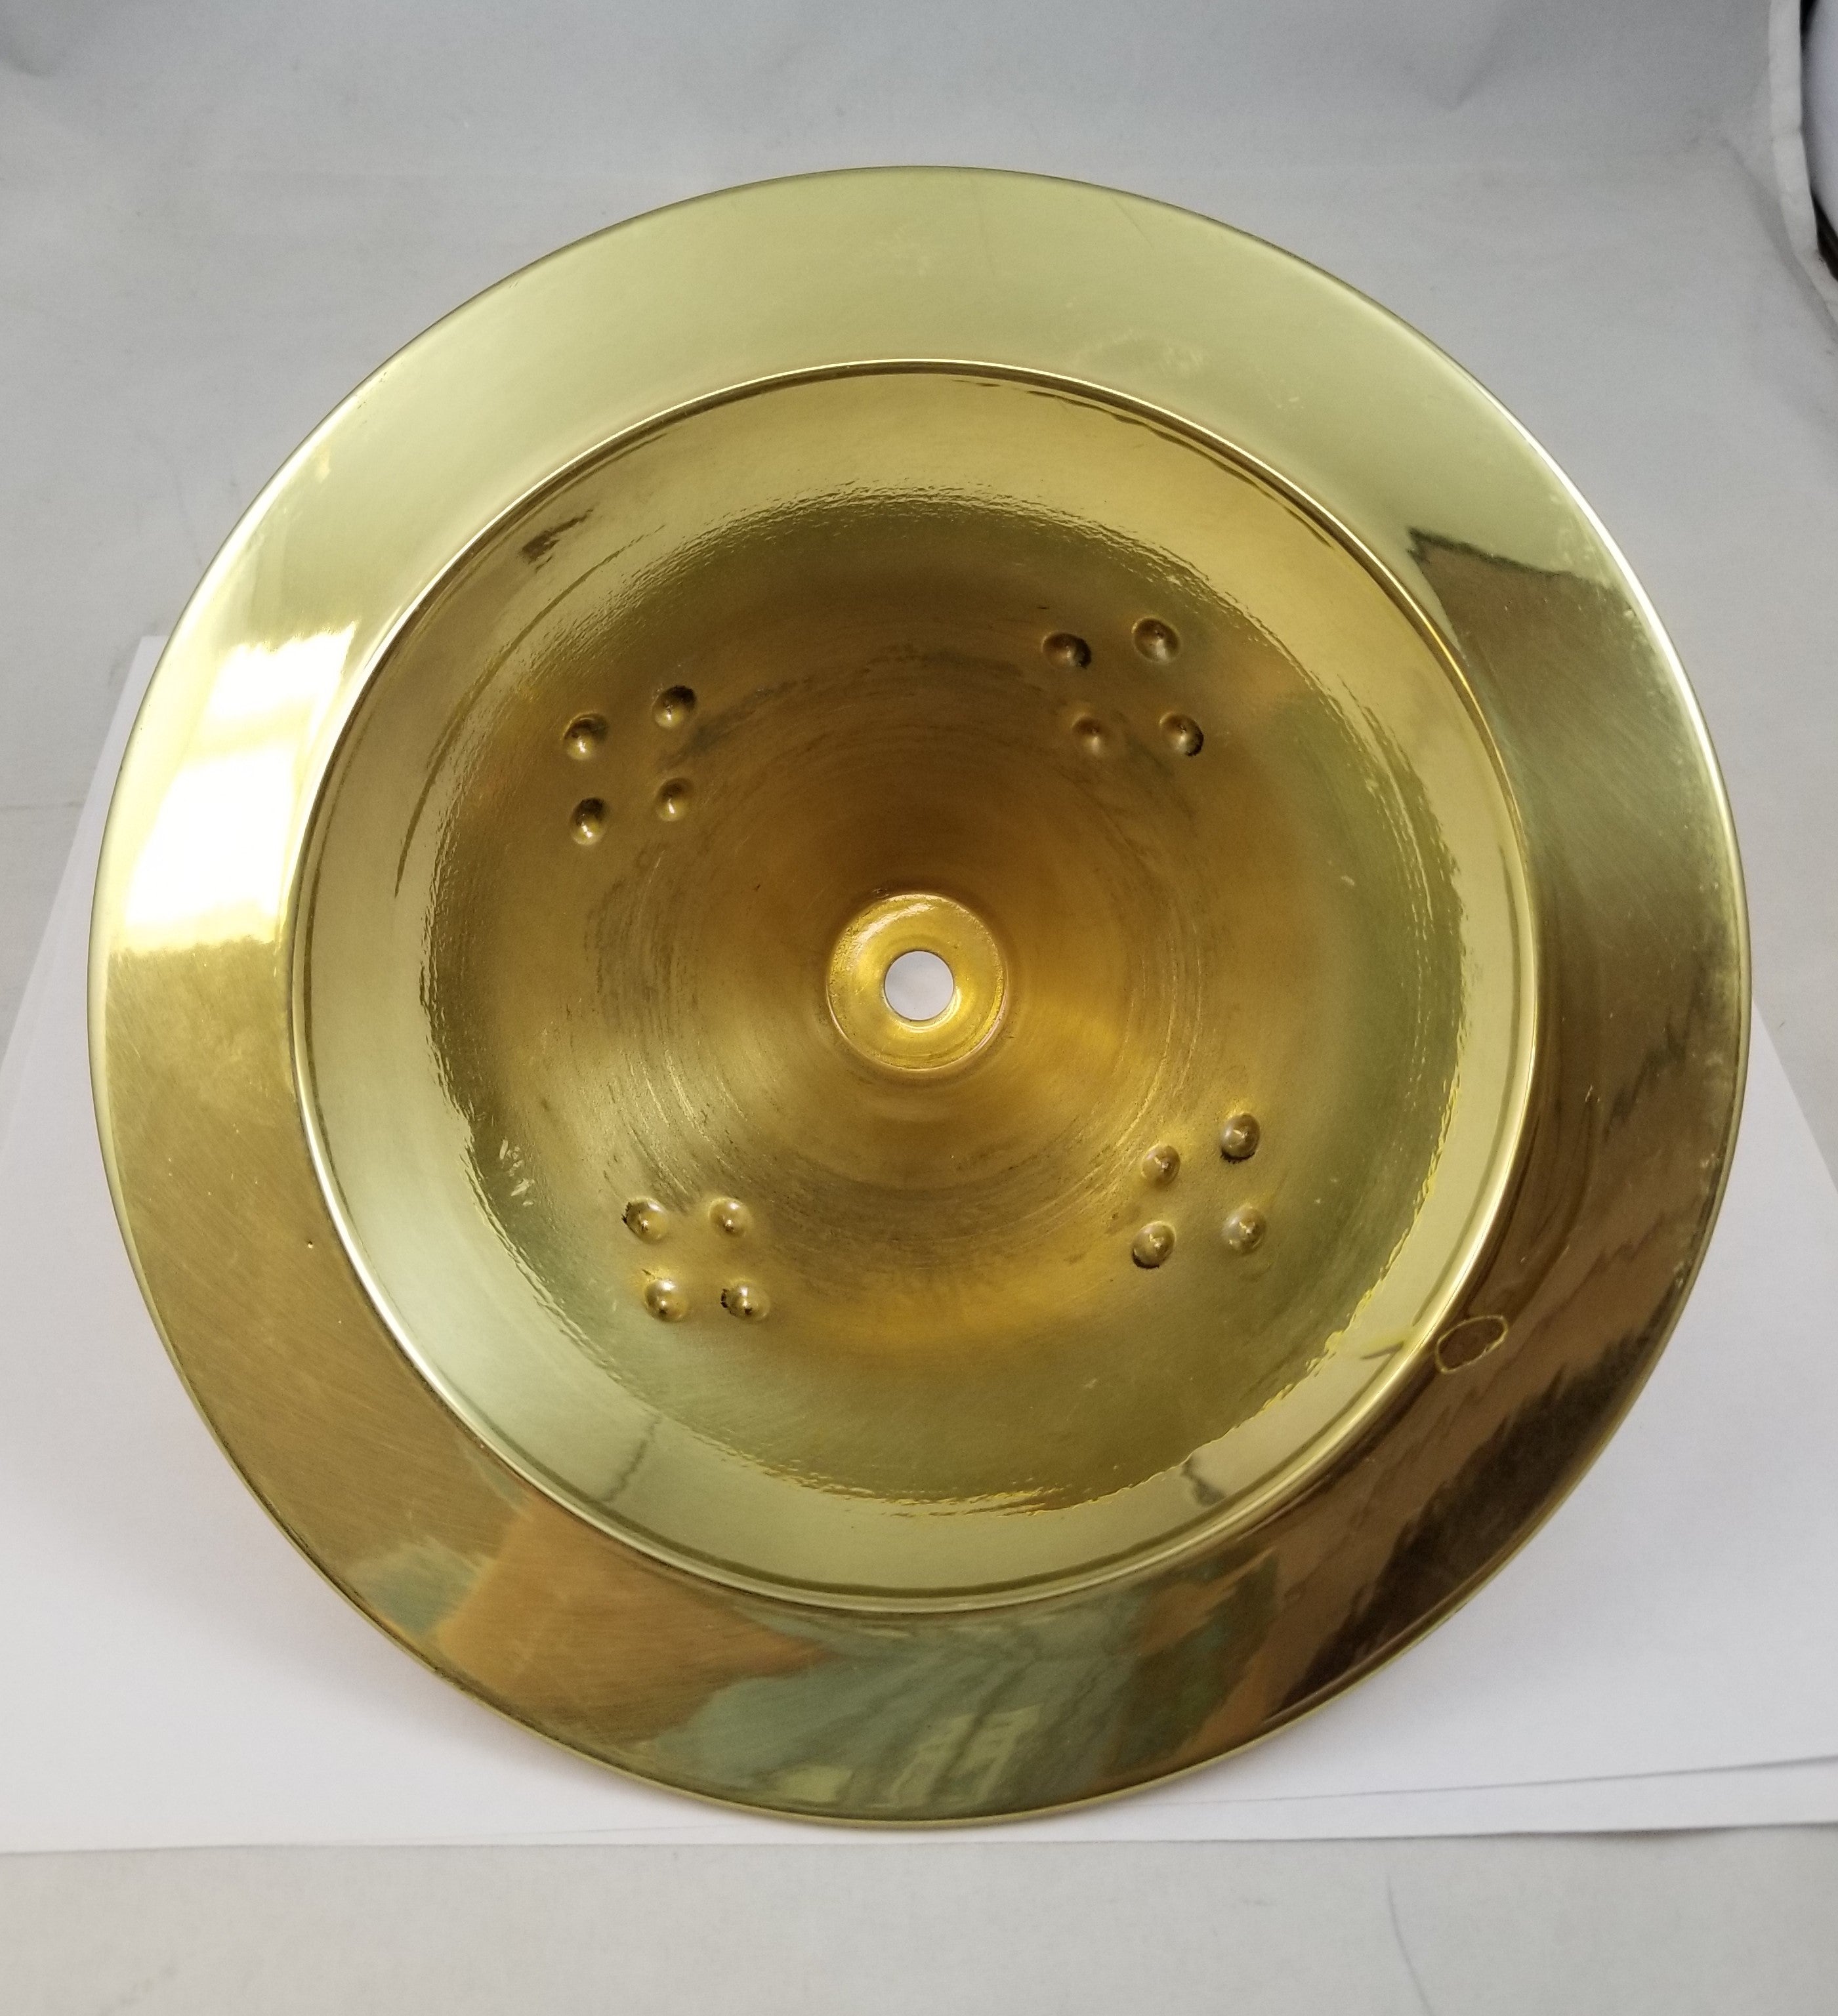 Lamp base 8-1/4"dia.- w/ rolled edge Polished and Lacquered